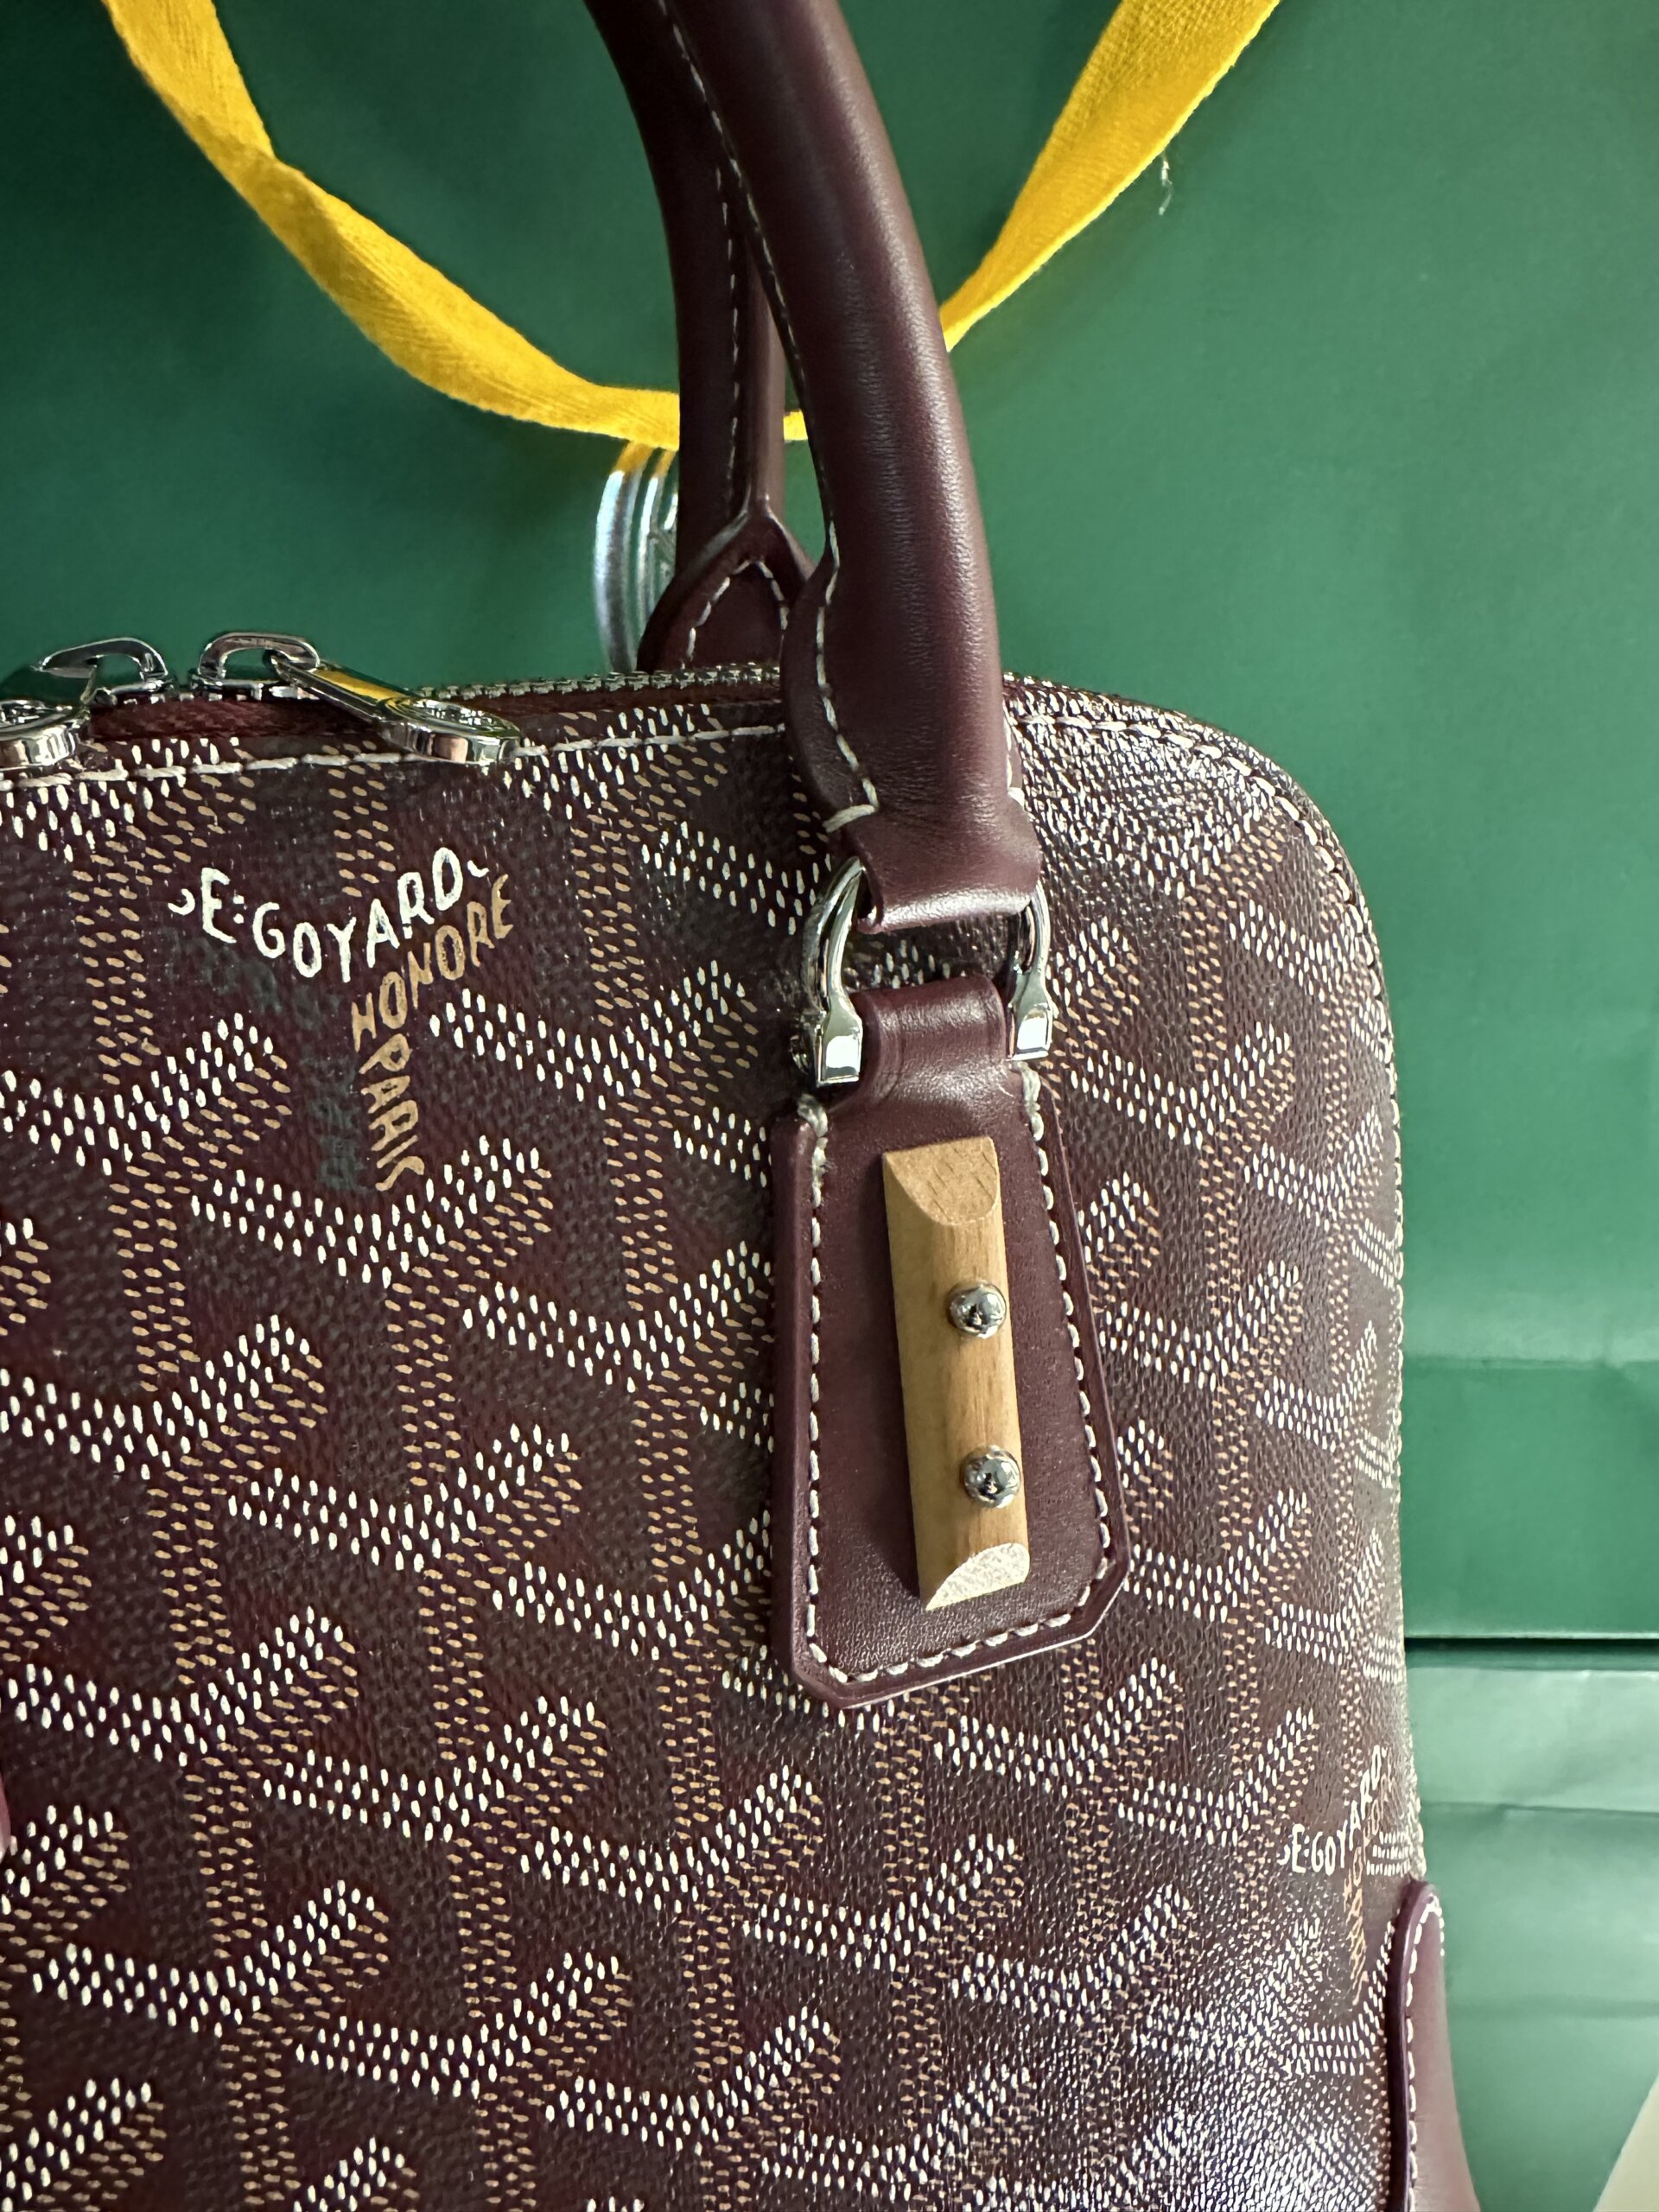 By Appointment UAE - Goyard Reedition Vendome in PM and Mini size